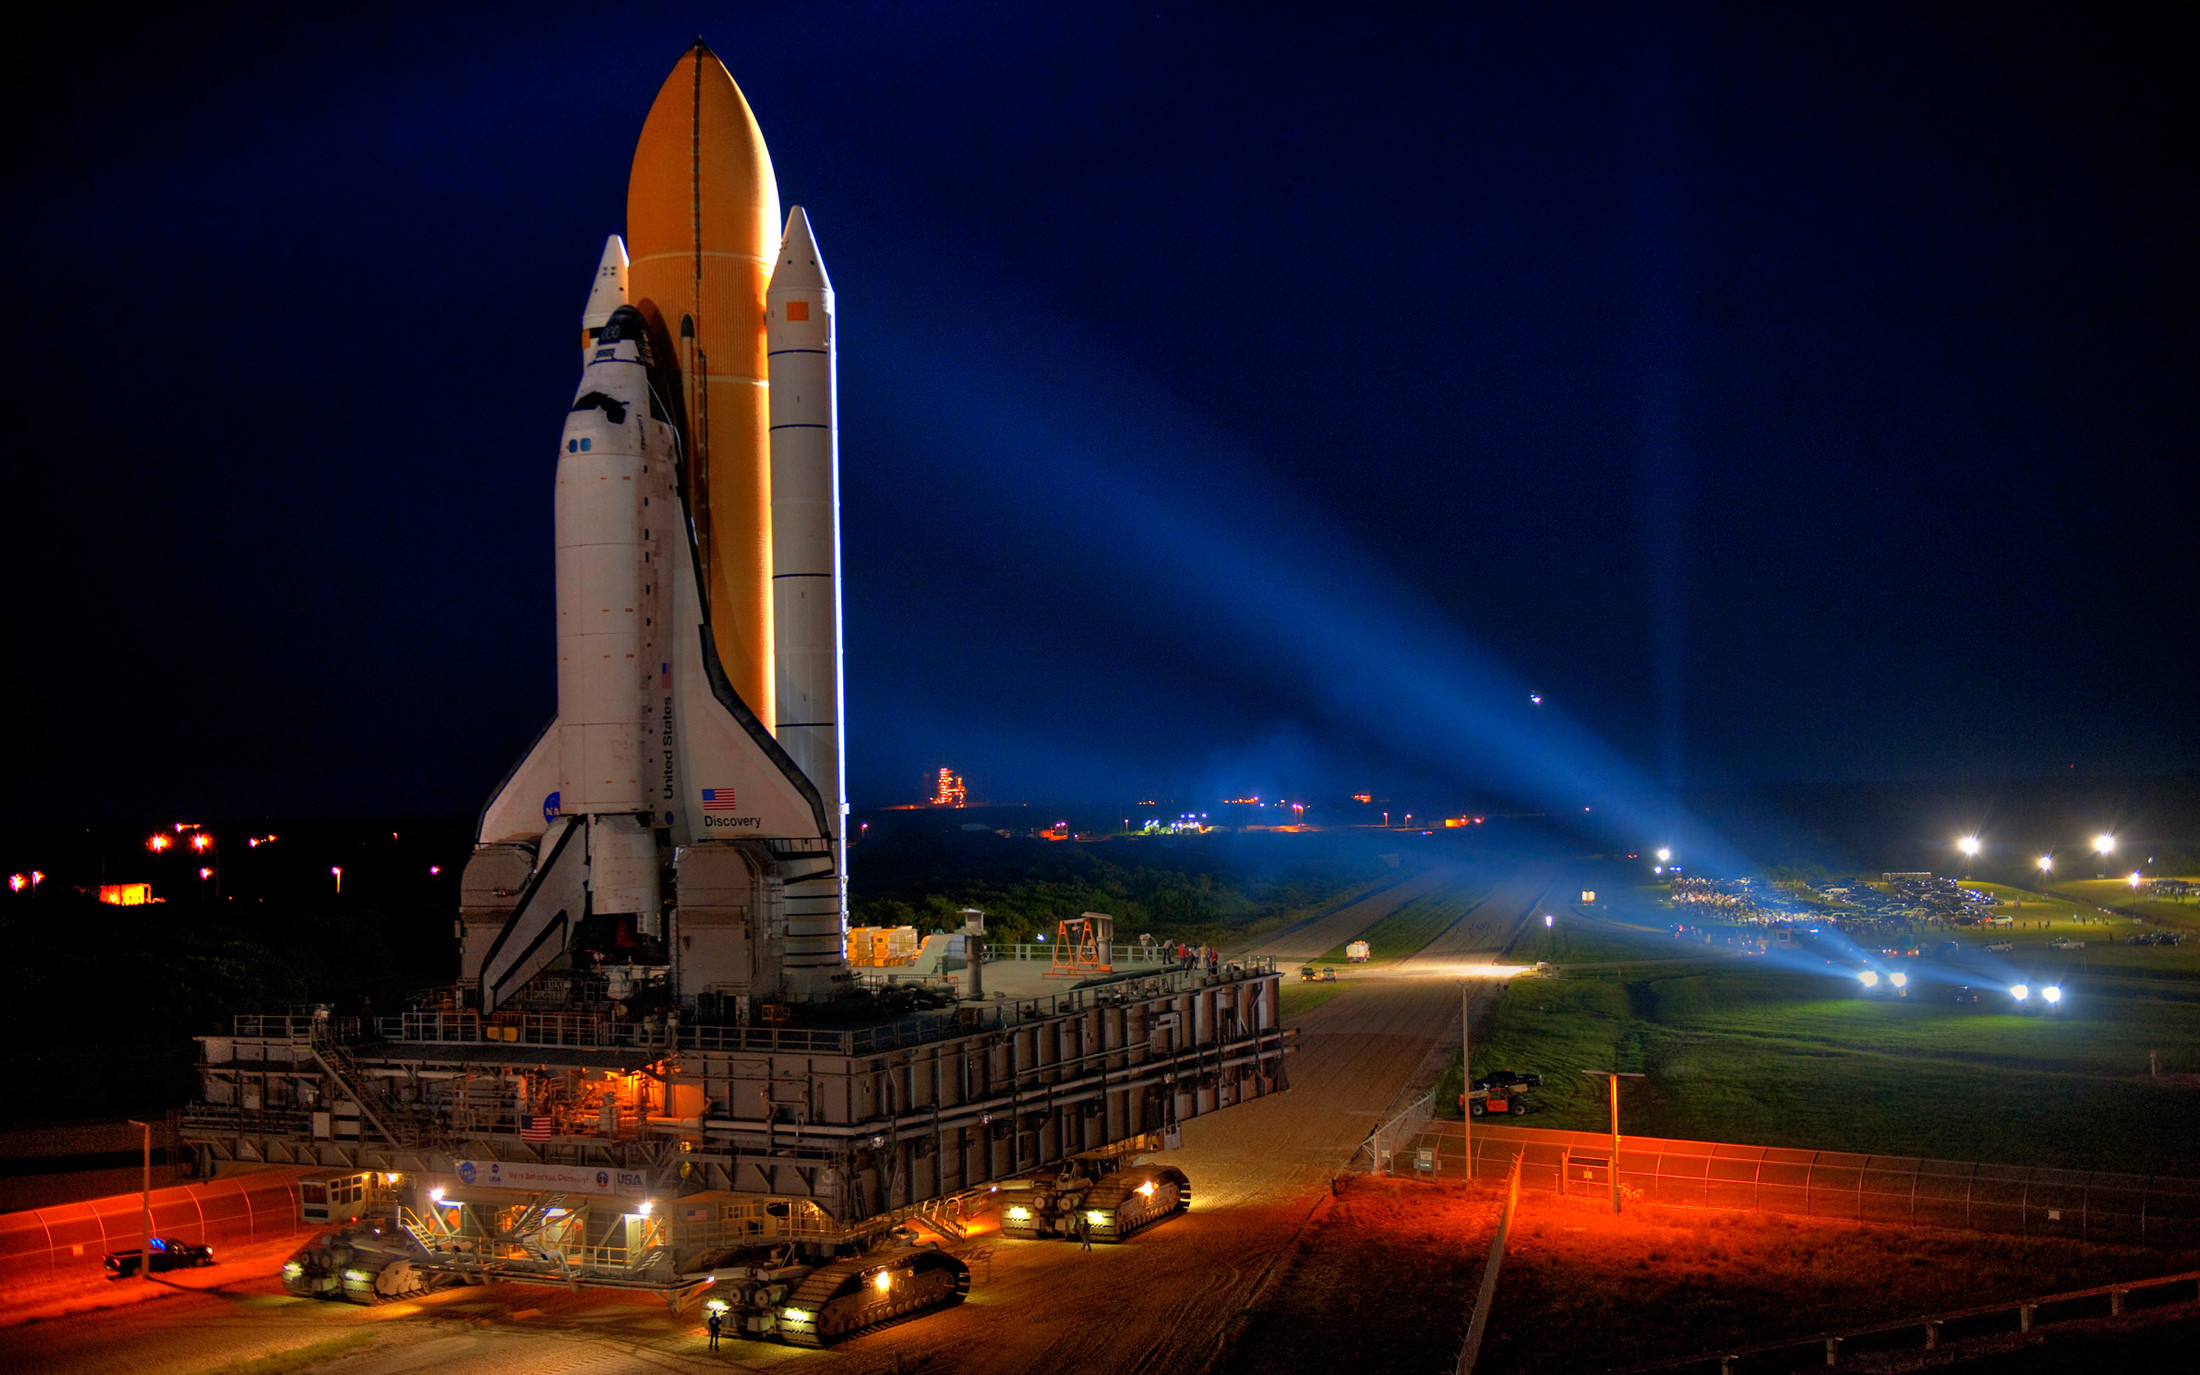 2200x1375 Just a few NASA/Space Shuttle wallpapers I like.